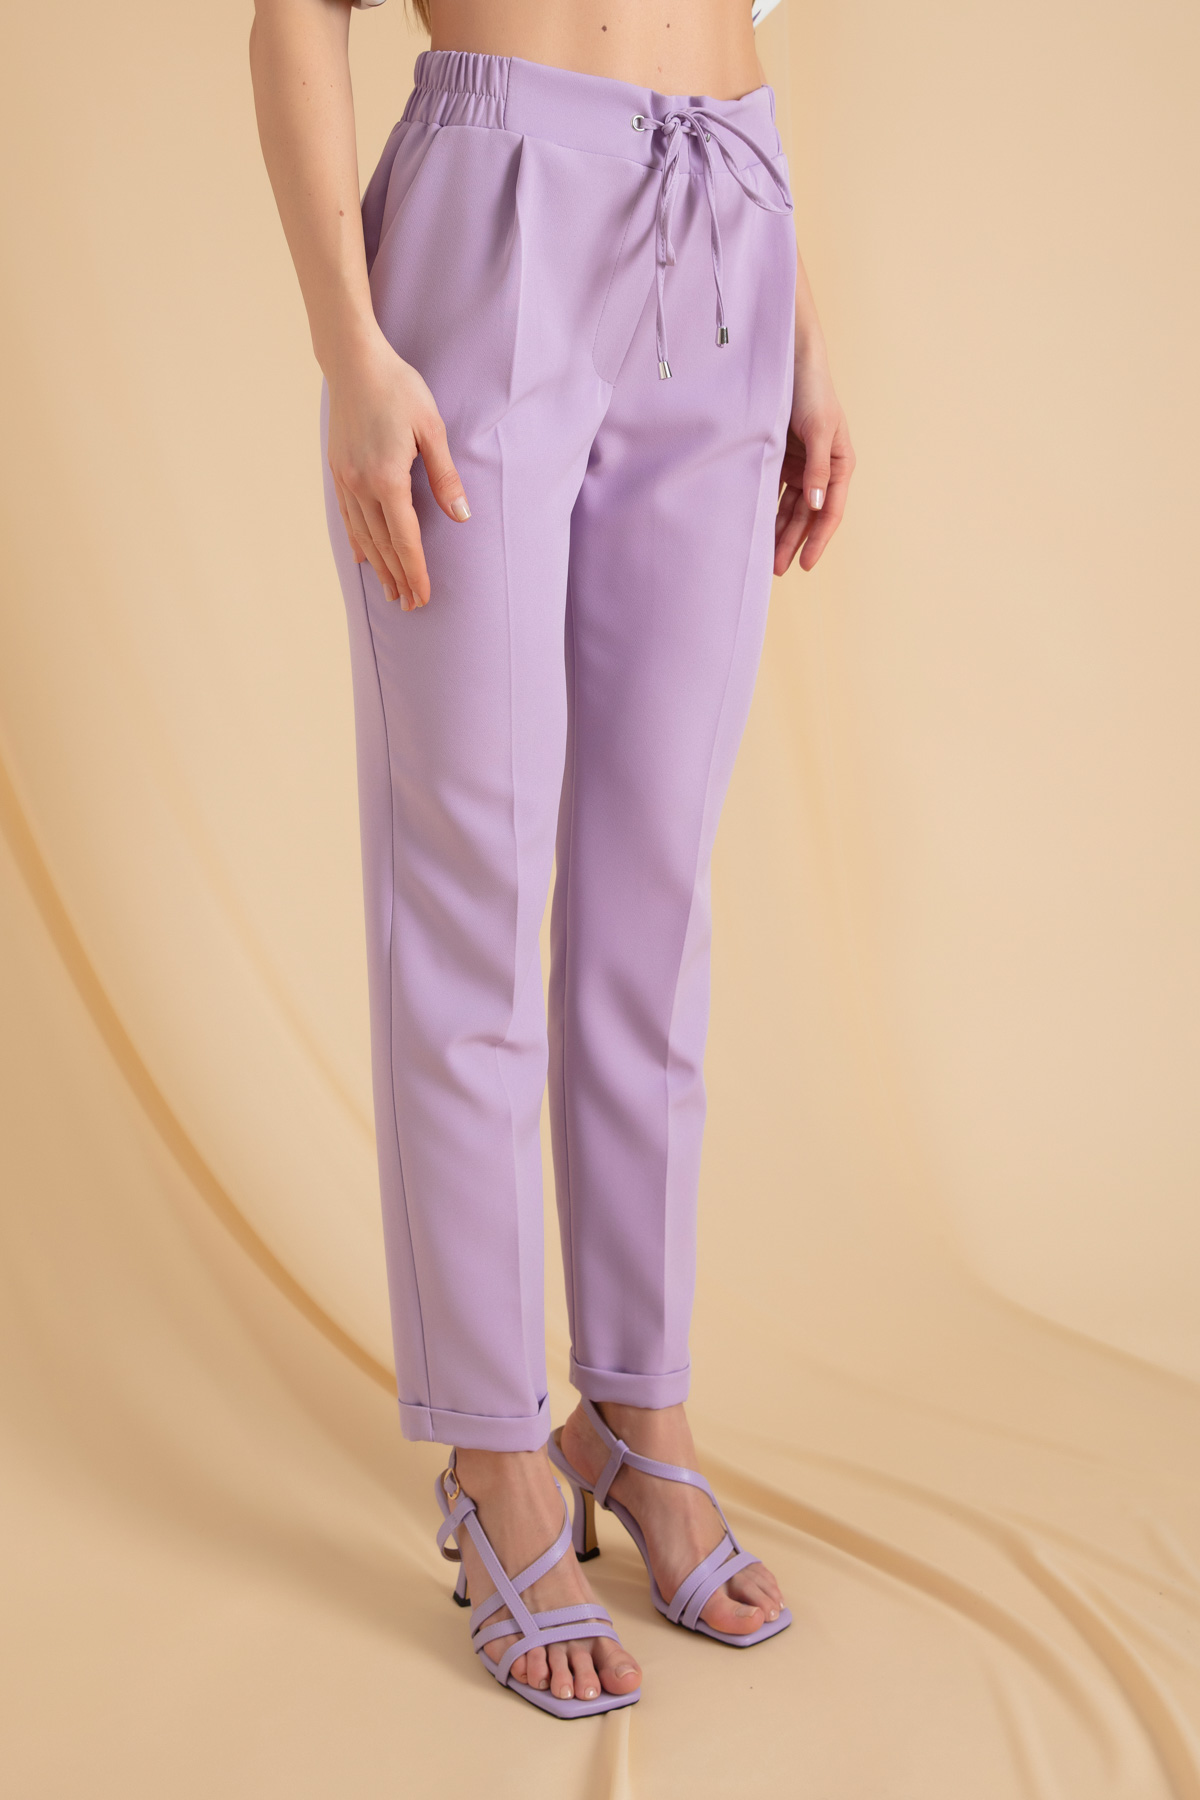 Women's Lilac Waist Lace-Up Trousers